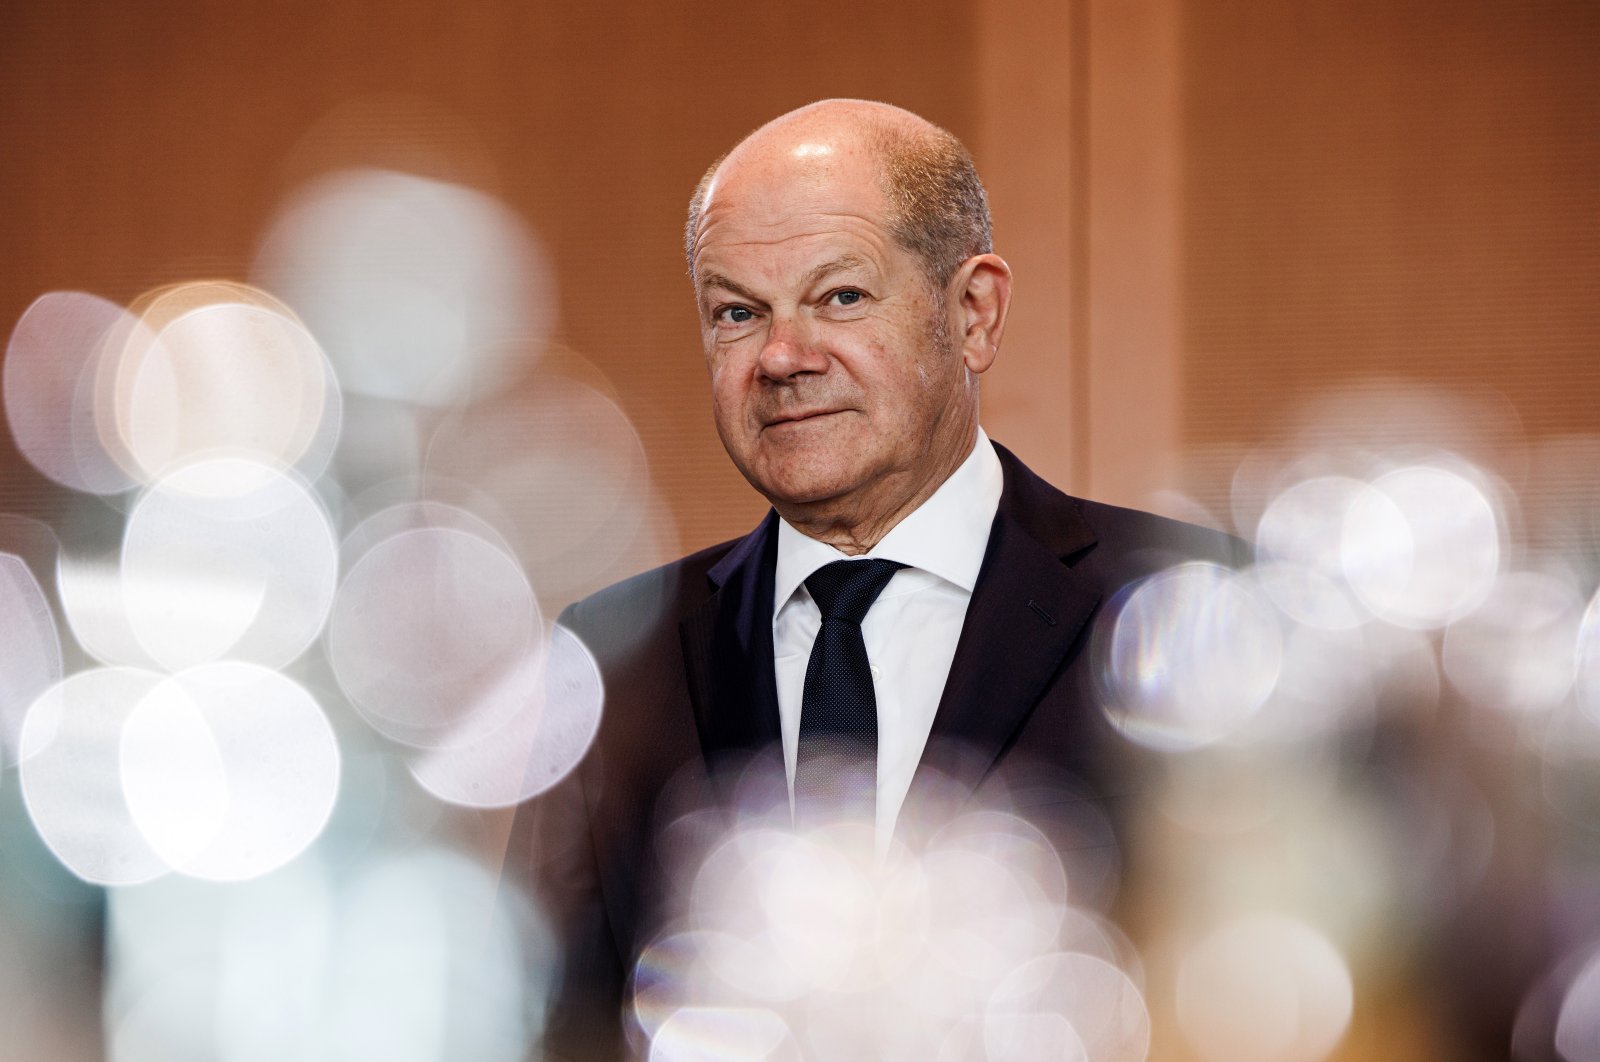 German Chancellor Olaf Scholz looks on during a cabinet meeting of the German government at the Chancellery in Berlin, Germany, June 7, 2023. (EPA Photo)